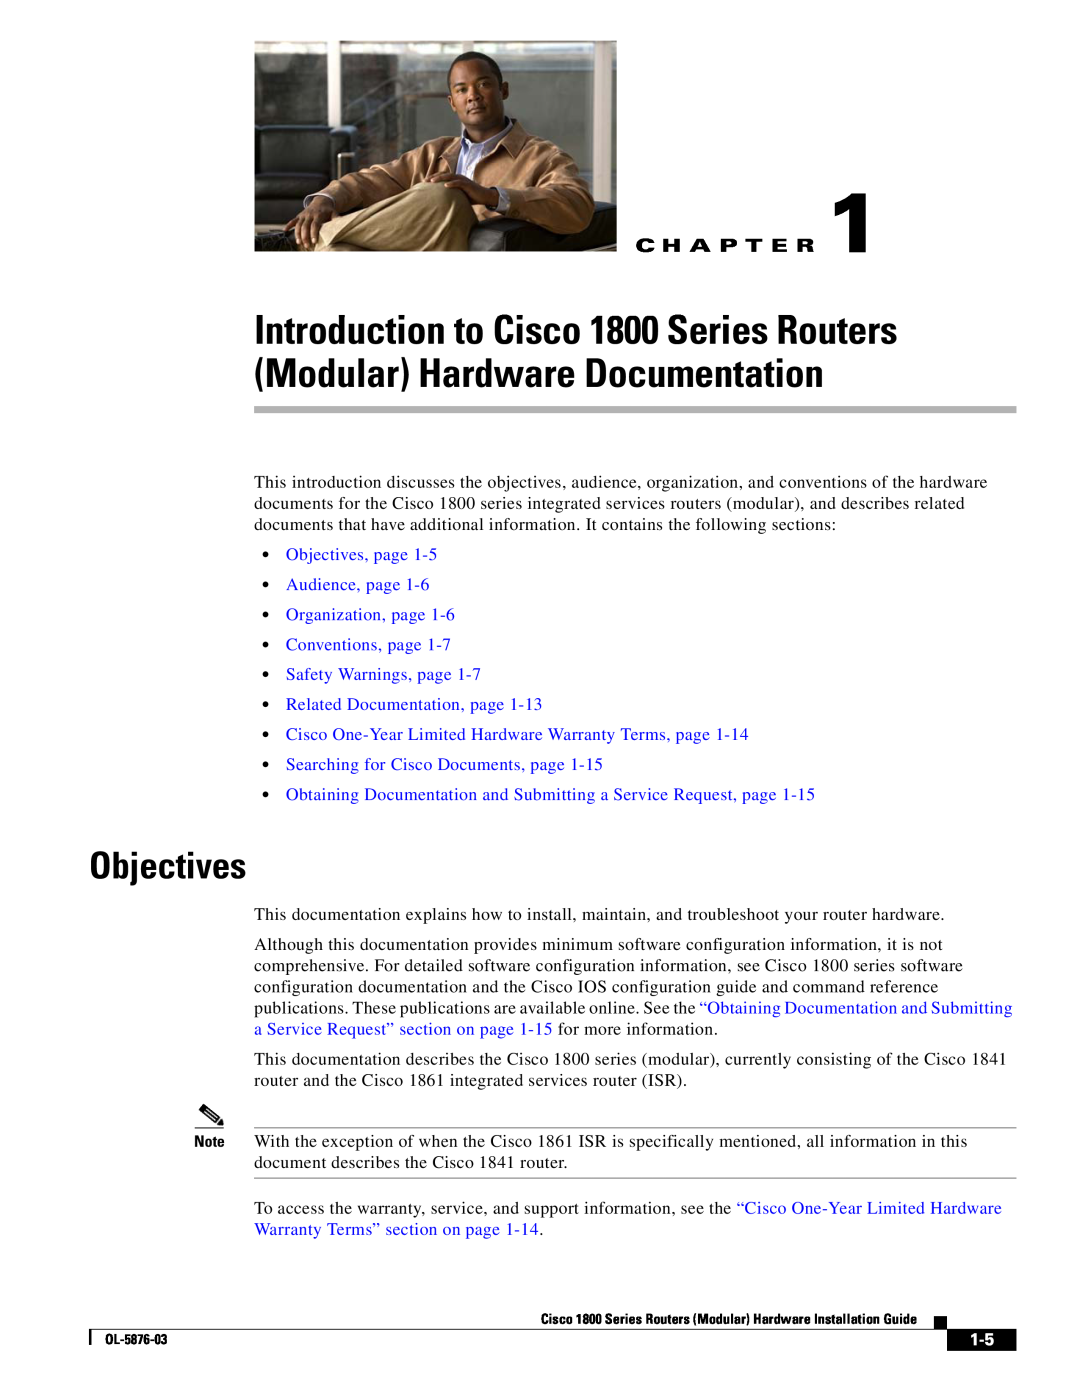 Cisco Systems CISCO1841-HSEC/K9-RF manual Objectives, C H A P T E R, Safety Warnings, page Related Documentation, page 